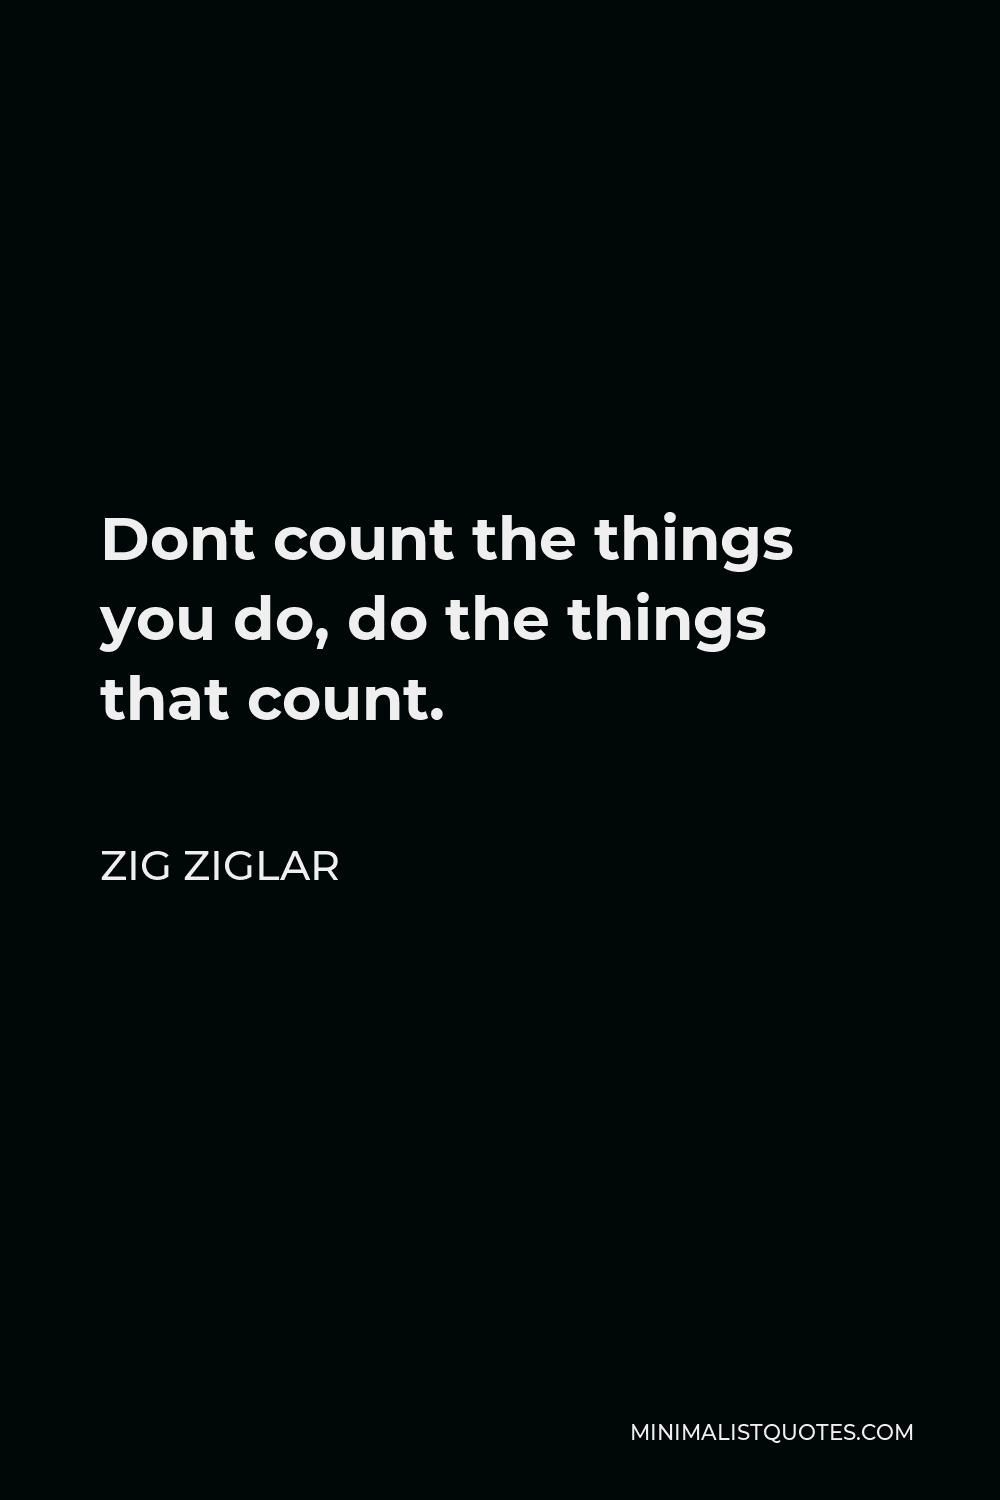 Zig Ziglar Quote - Dont count the things you do, do the things that count.